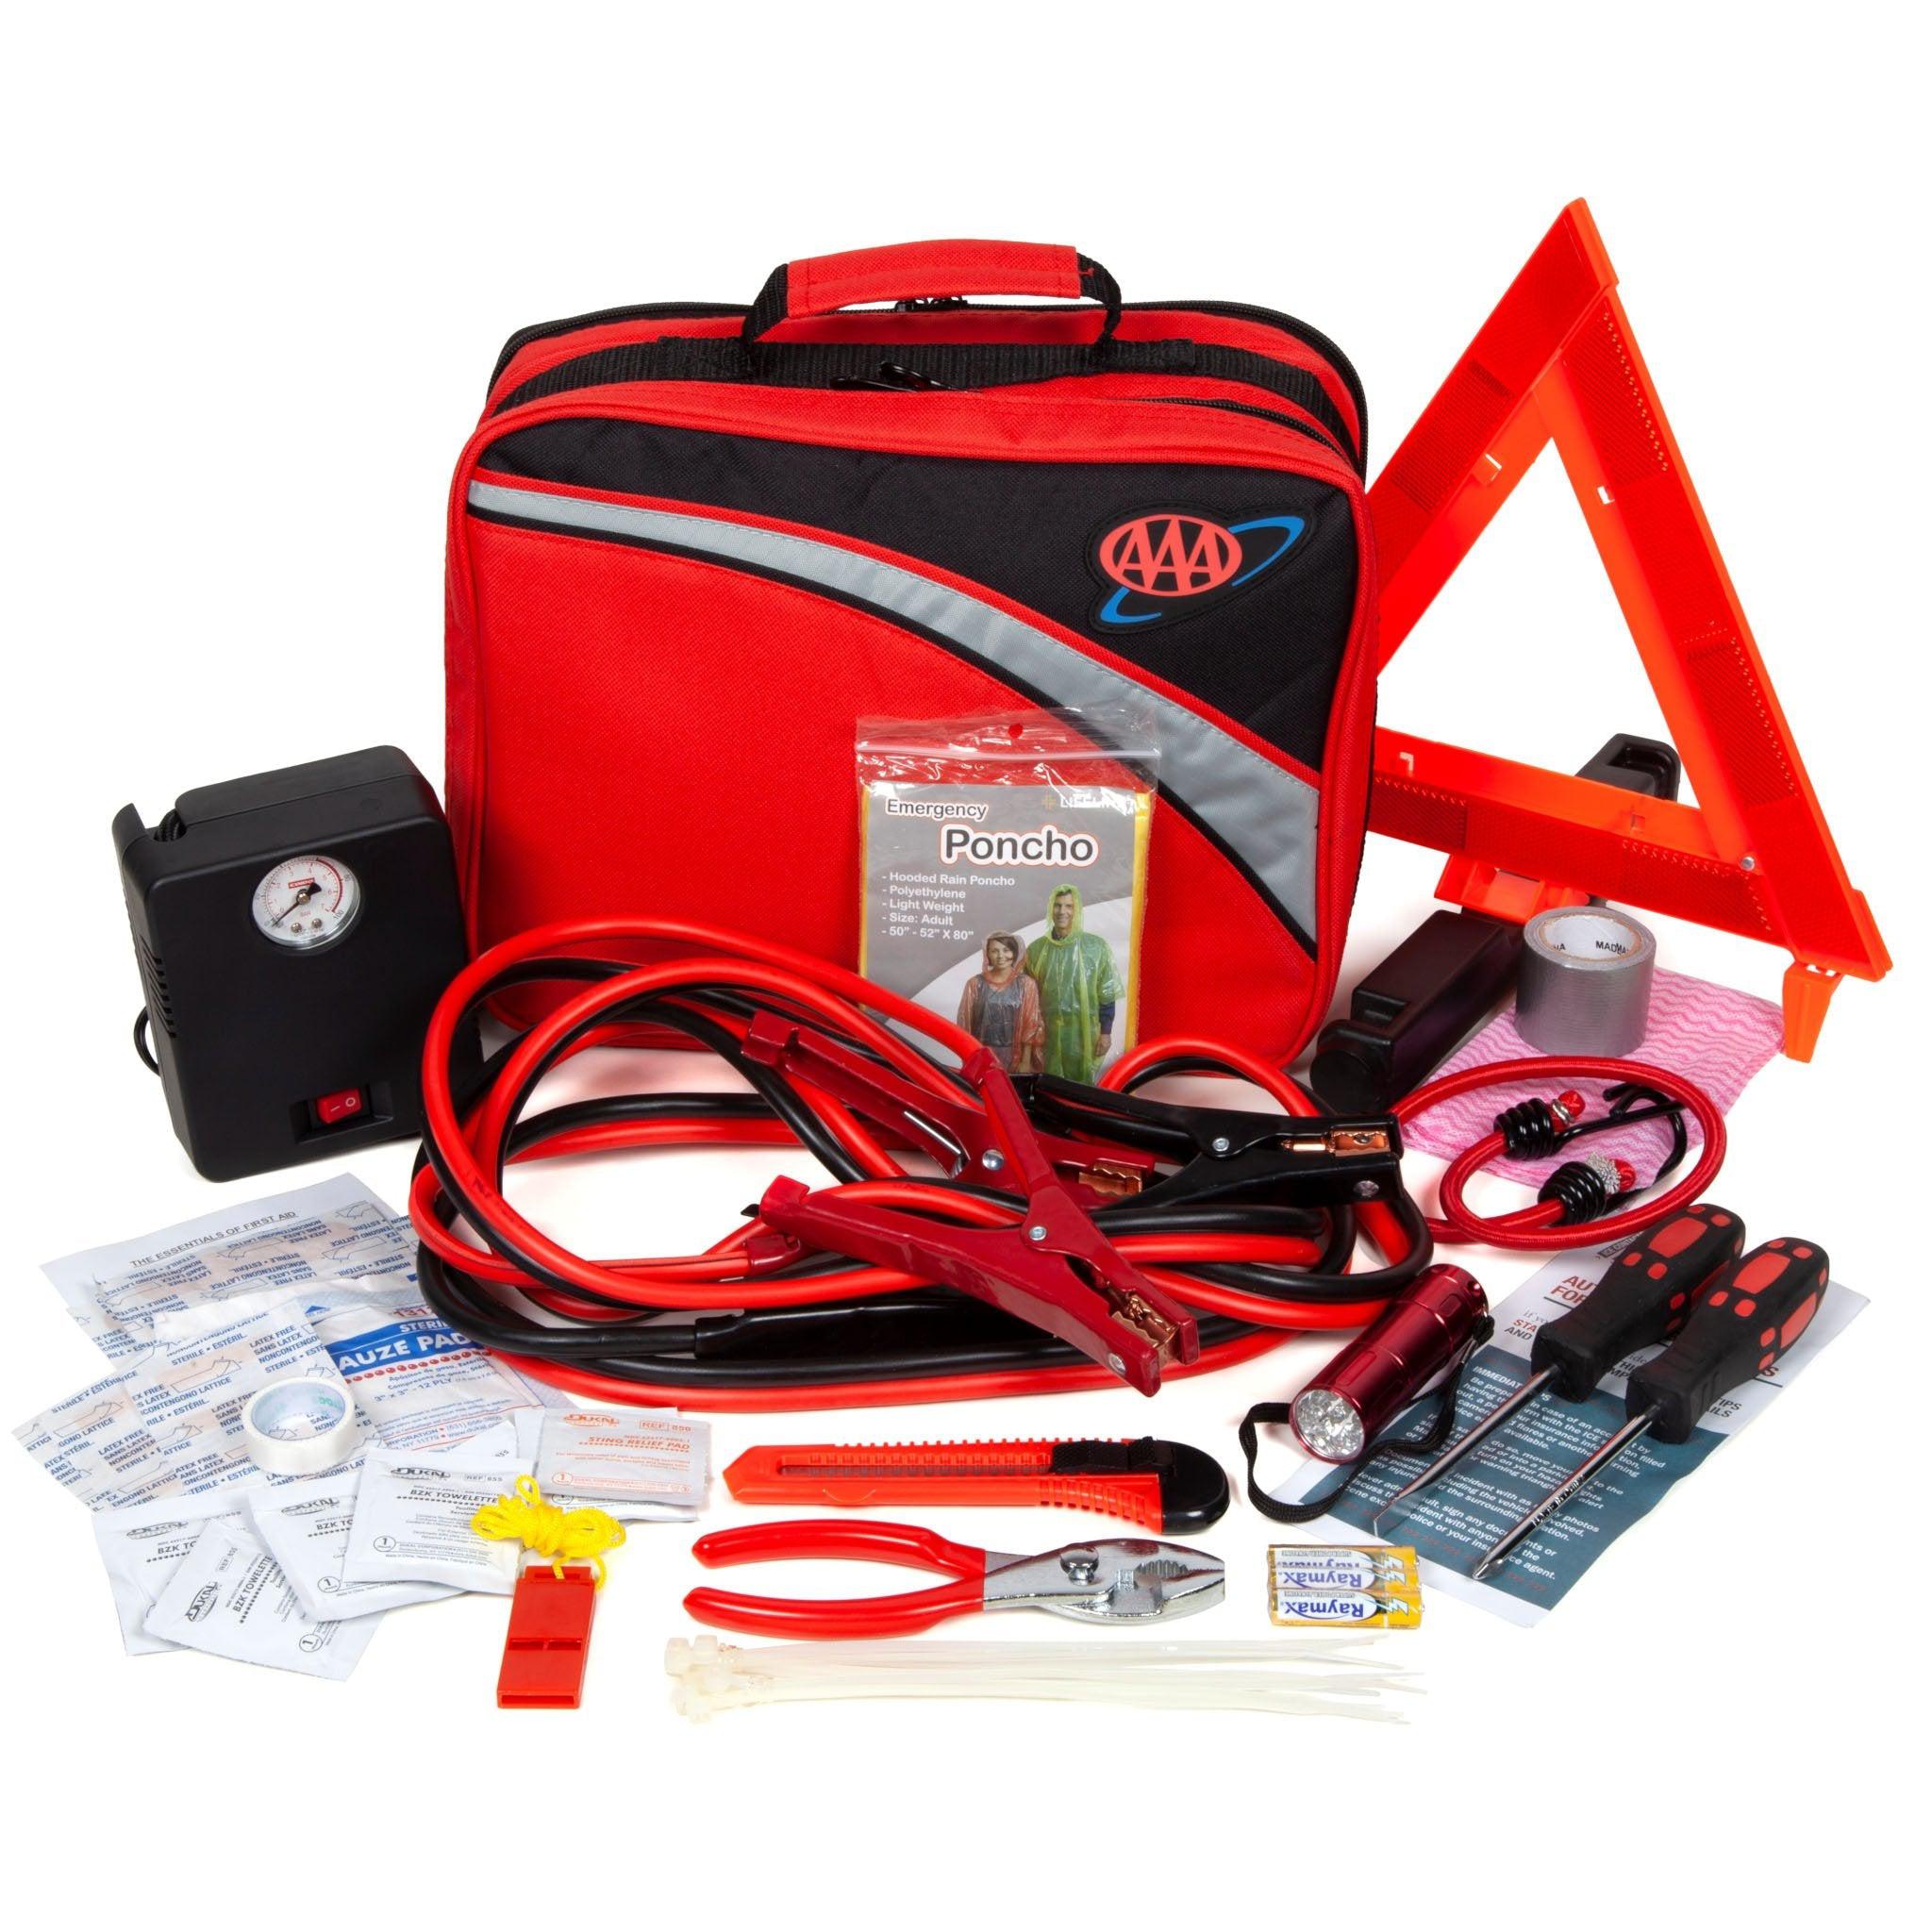 Car Roadside Emergency Kit with Jumper Cables, Auto Vehicle Safety Road  Side Assistance Kits, Winter Car Kit for Women and Men, with Portable Air